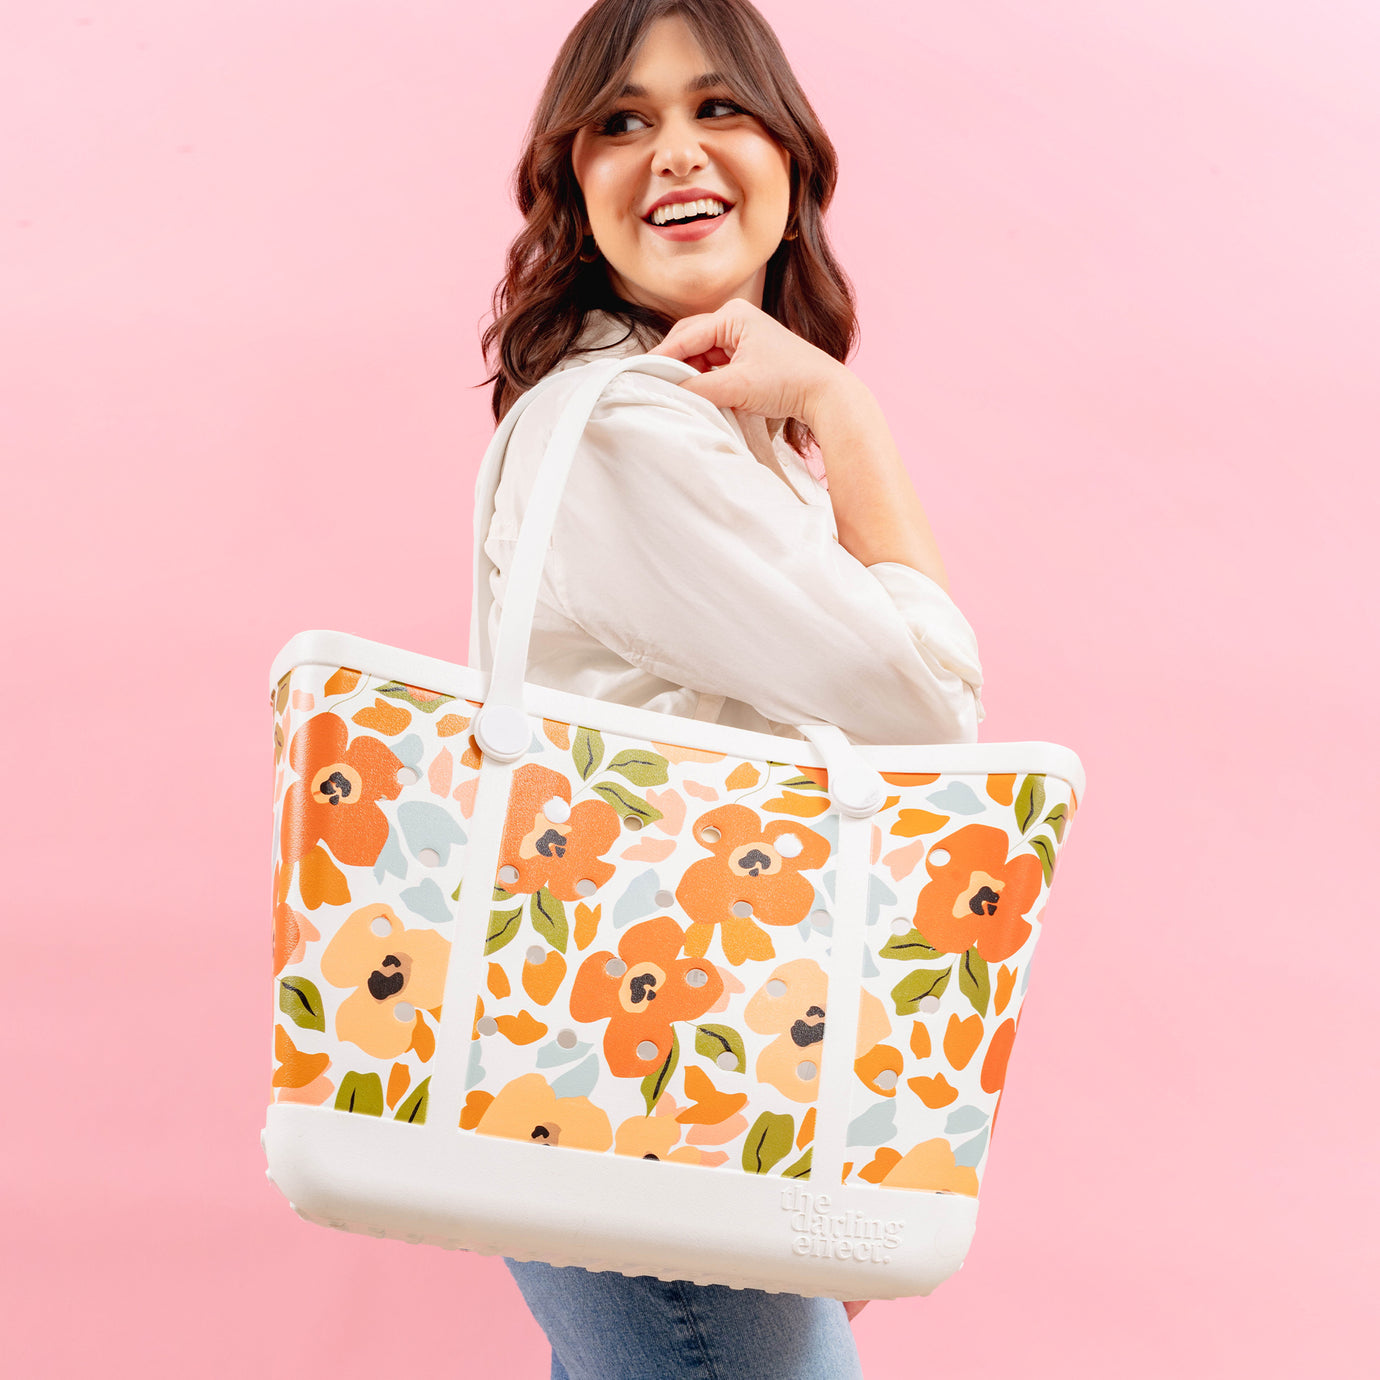 Carry-It-All Tote Bags